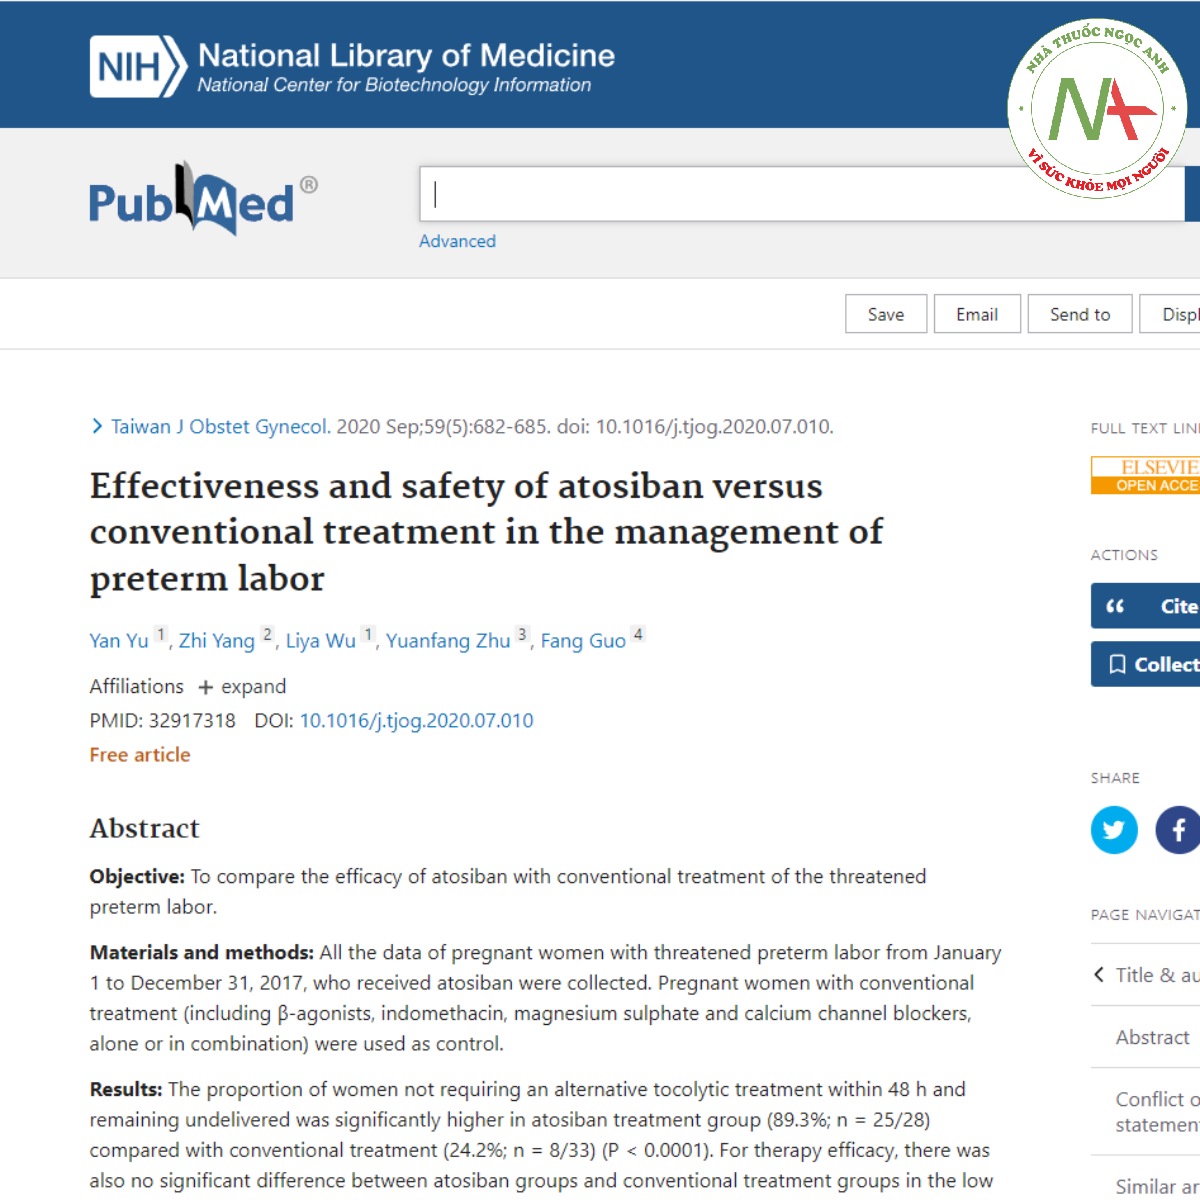 Effectiveness and safety of atosiban versus conventional treatment in the management of preterm labor